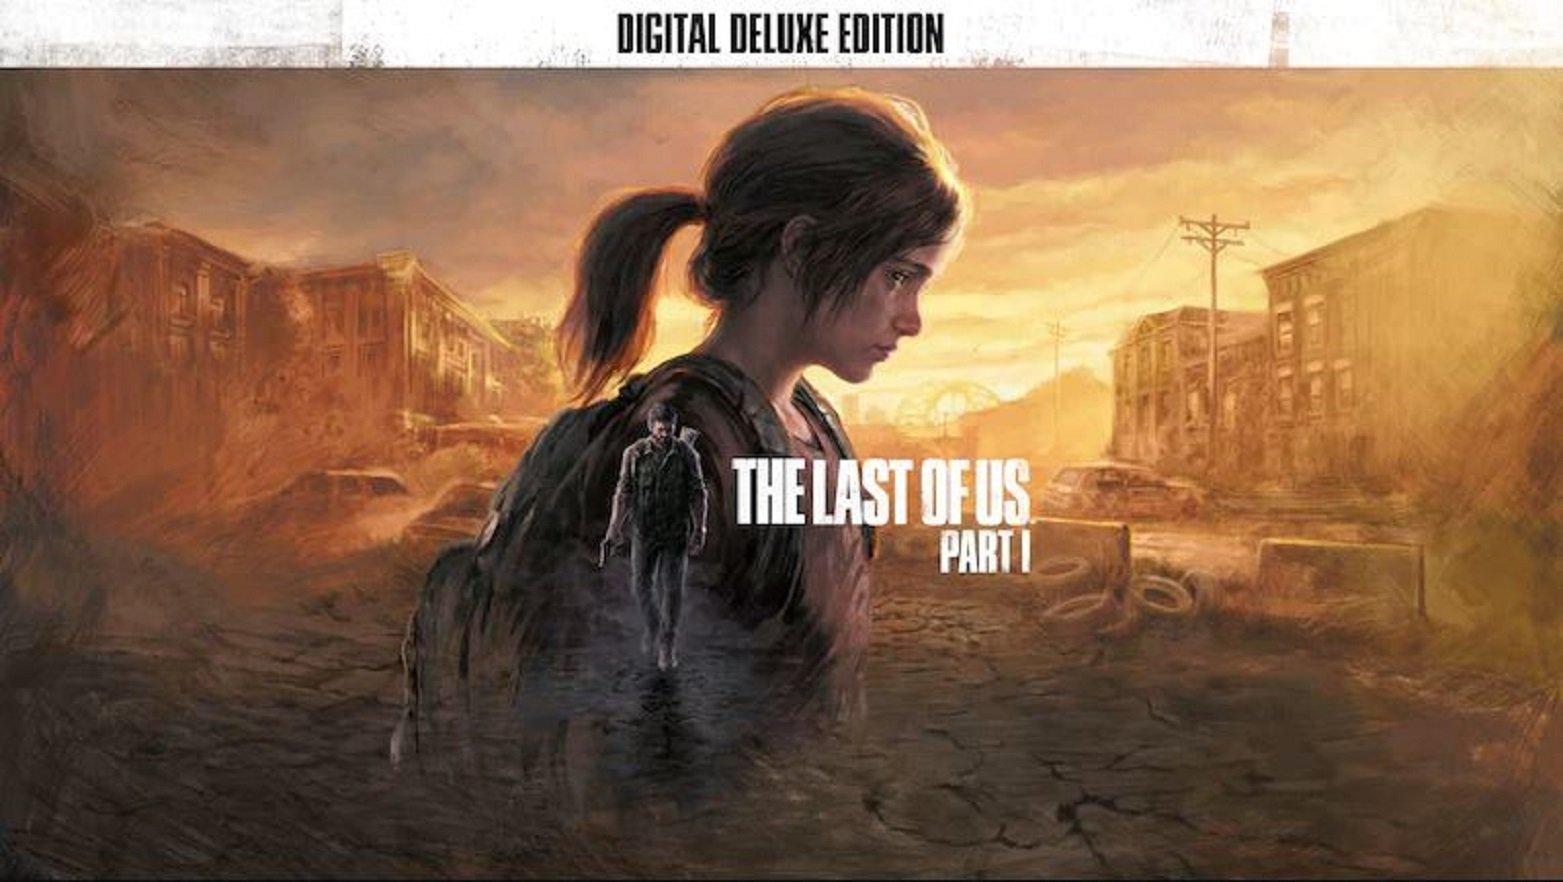 The Last of Us™ Part I | Download and Buy Today - Epic Games Store